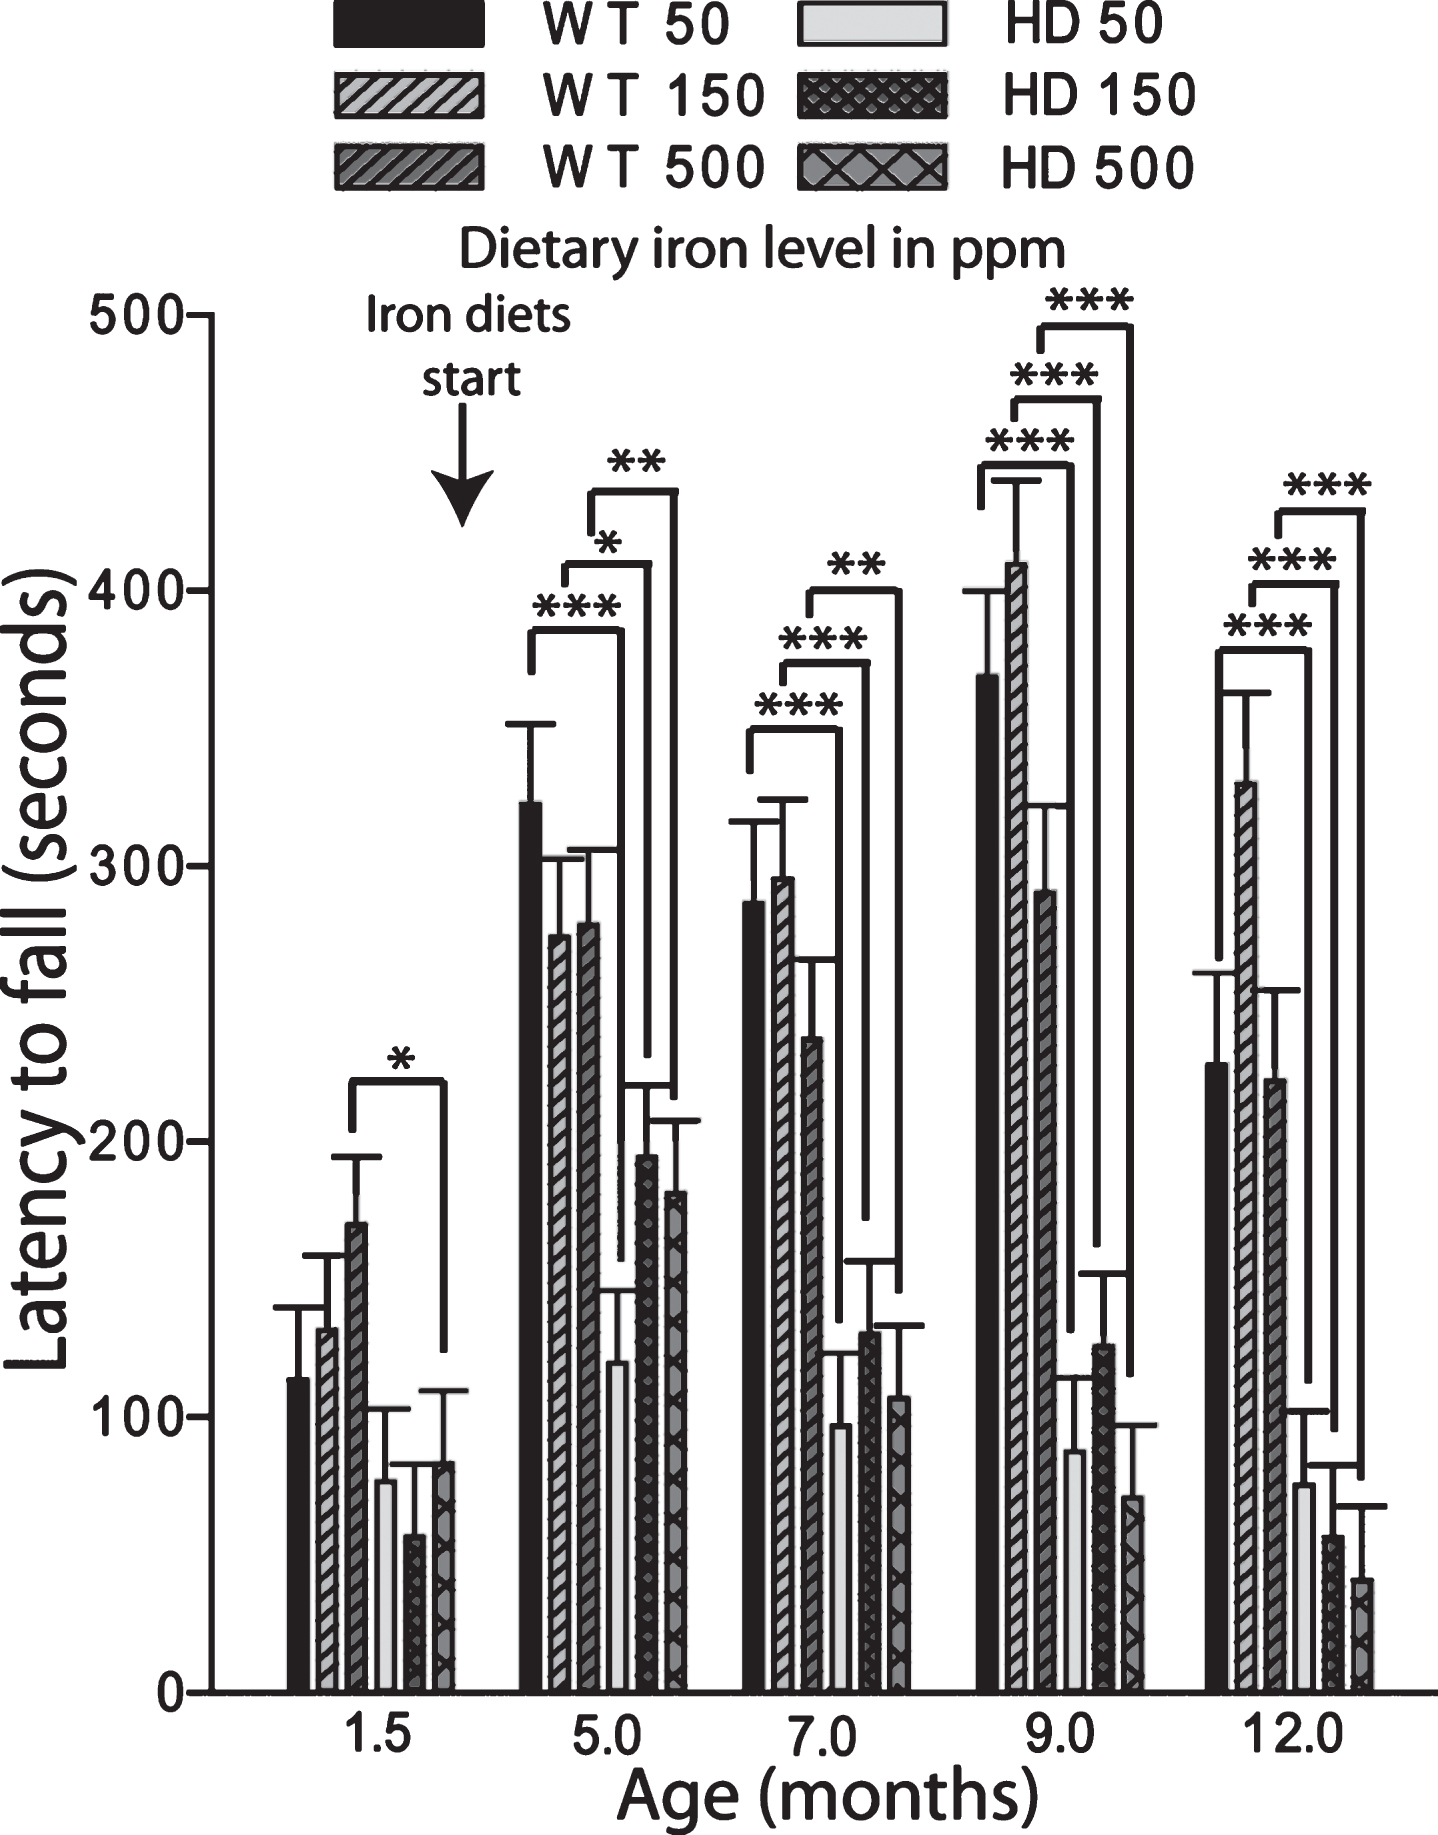 Adult iron supplementation does not alter rota-rod motor endurance in YAC128 HD mice. Mice were maintained on special diets from 2–12 months of age. YAC128 HD groups performed significantly worse on the rota-rod compared to respective iron-dose wild-type mouse groups. Iron supplementation had no effect on performance. P-values: *p < 0.05, **p < 0.01, ***p < 0.001, n = 19–24.